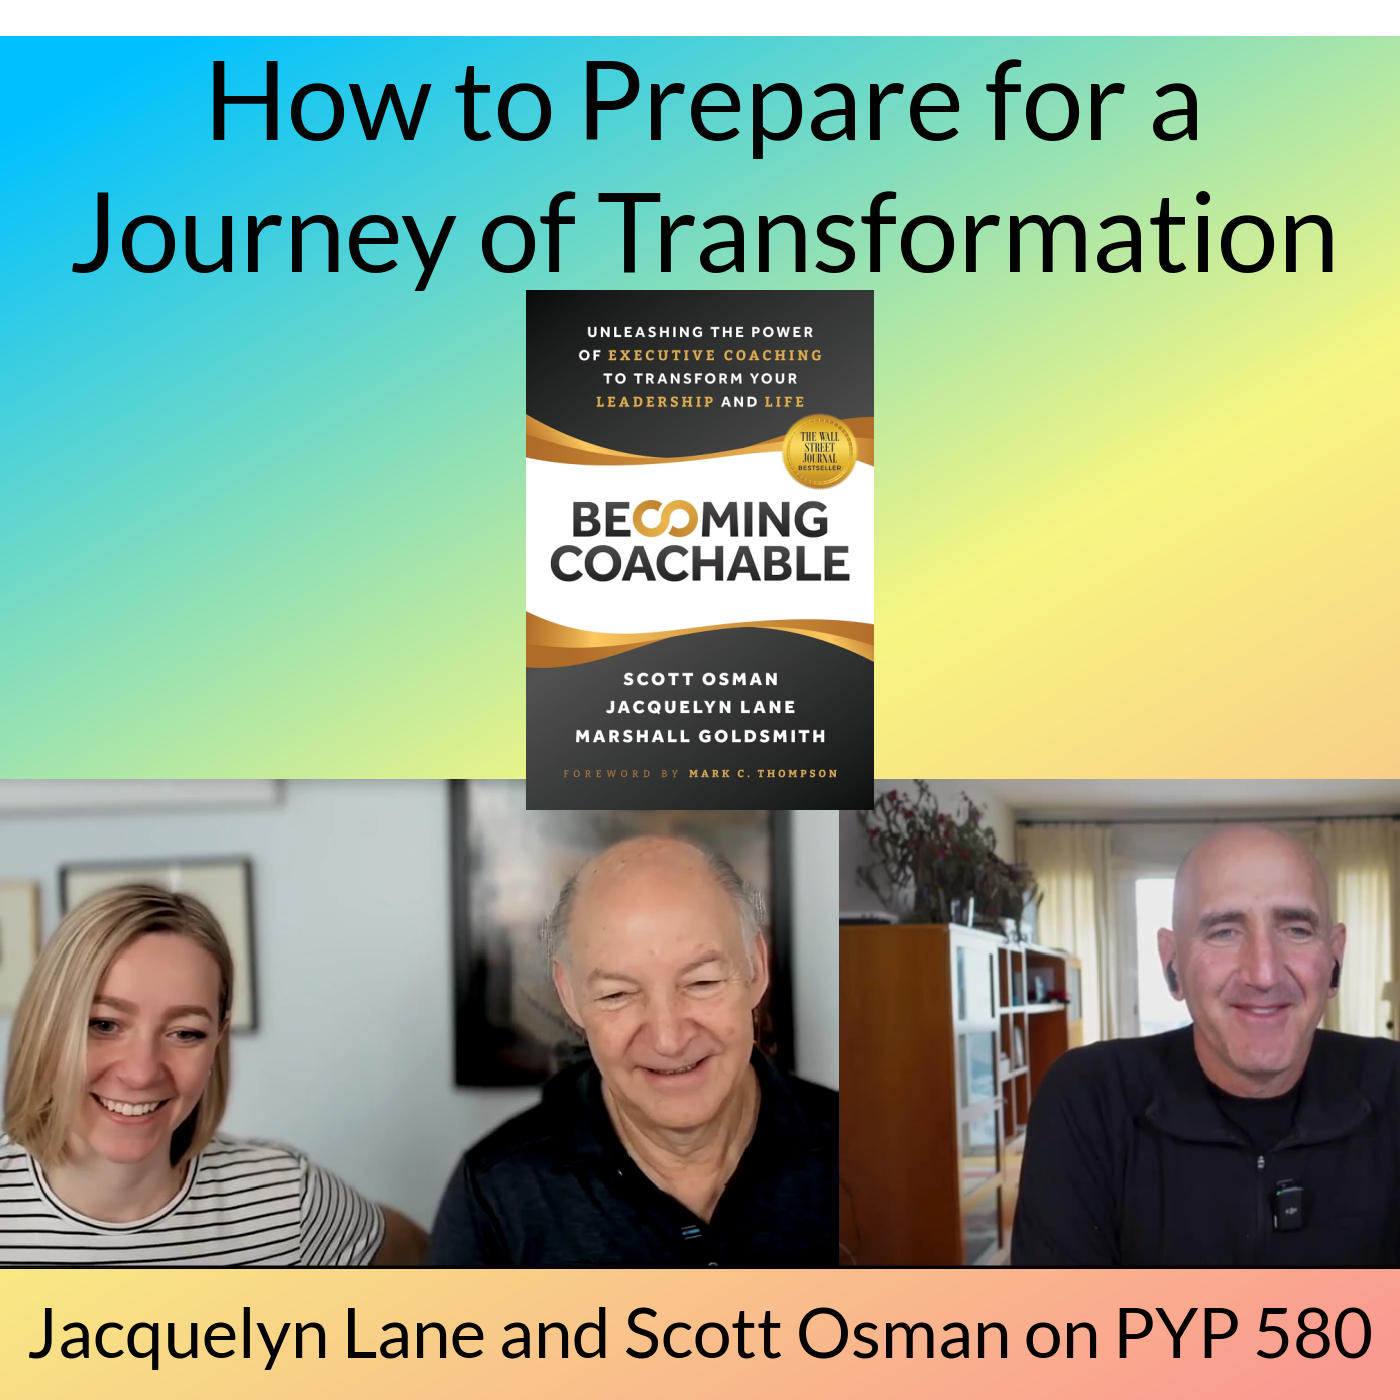 How to Prepare for a Journey of Transformation: Jacquelyn Lane and Scott Osman on PYP 580